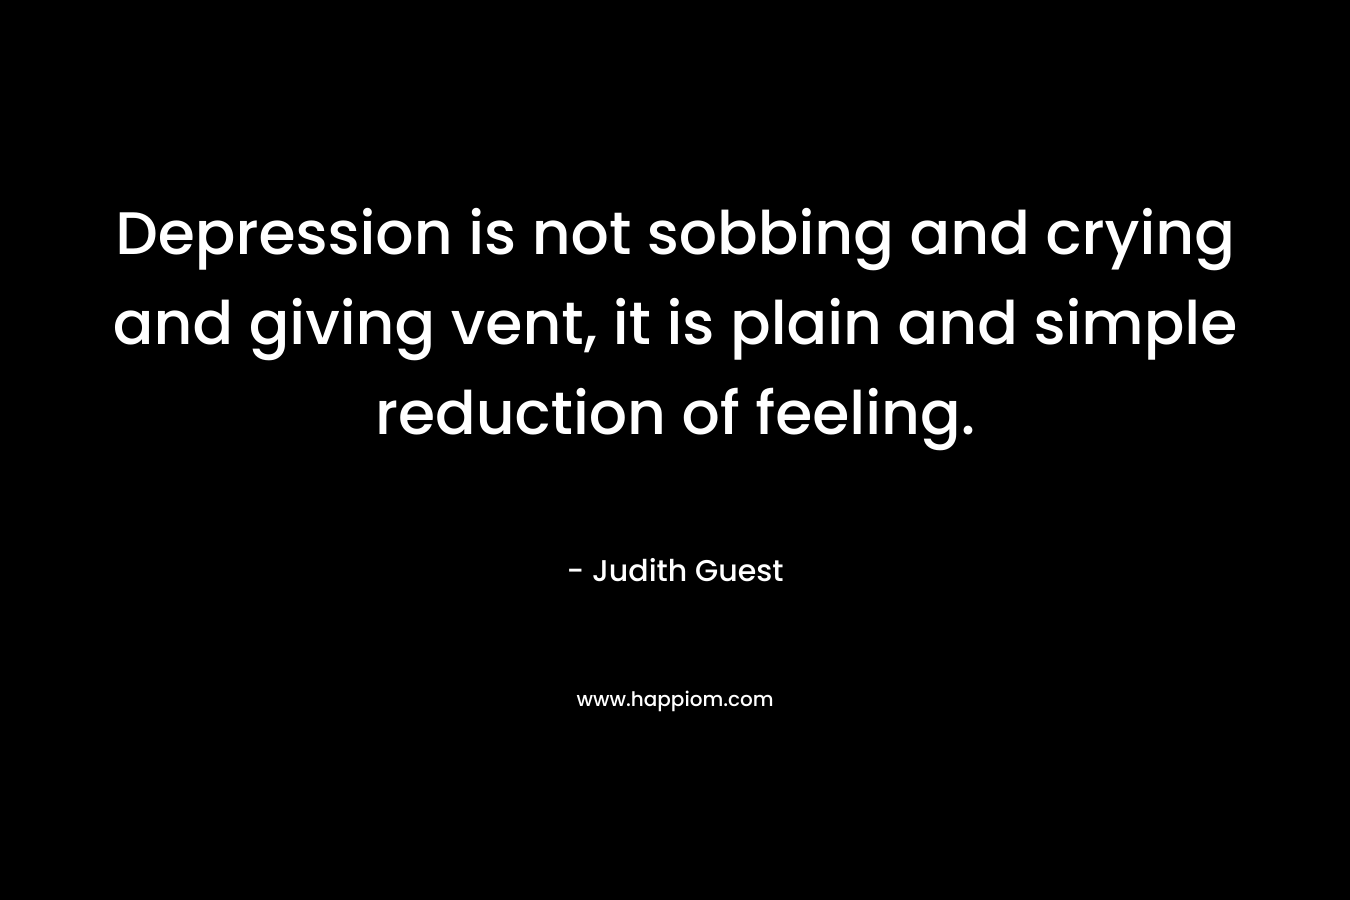 Depression is not sobbing and crying and giving vent, it is plain and simple reduction of feeling.